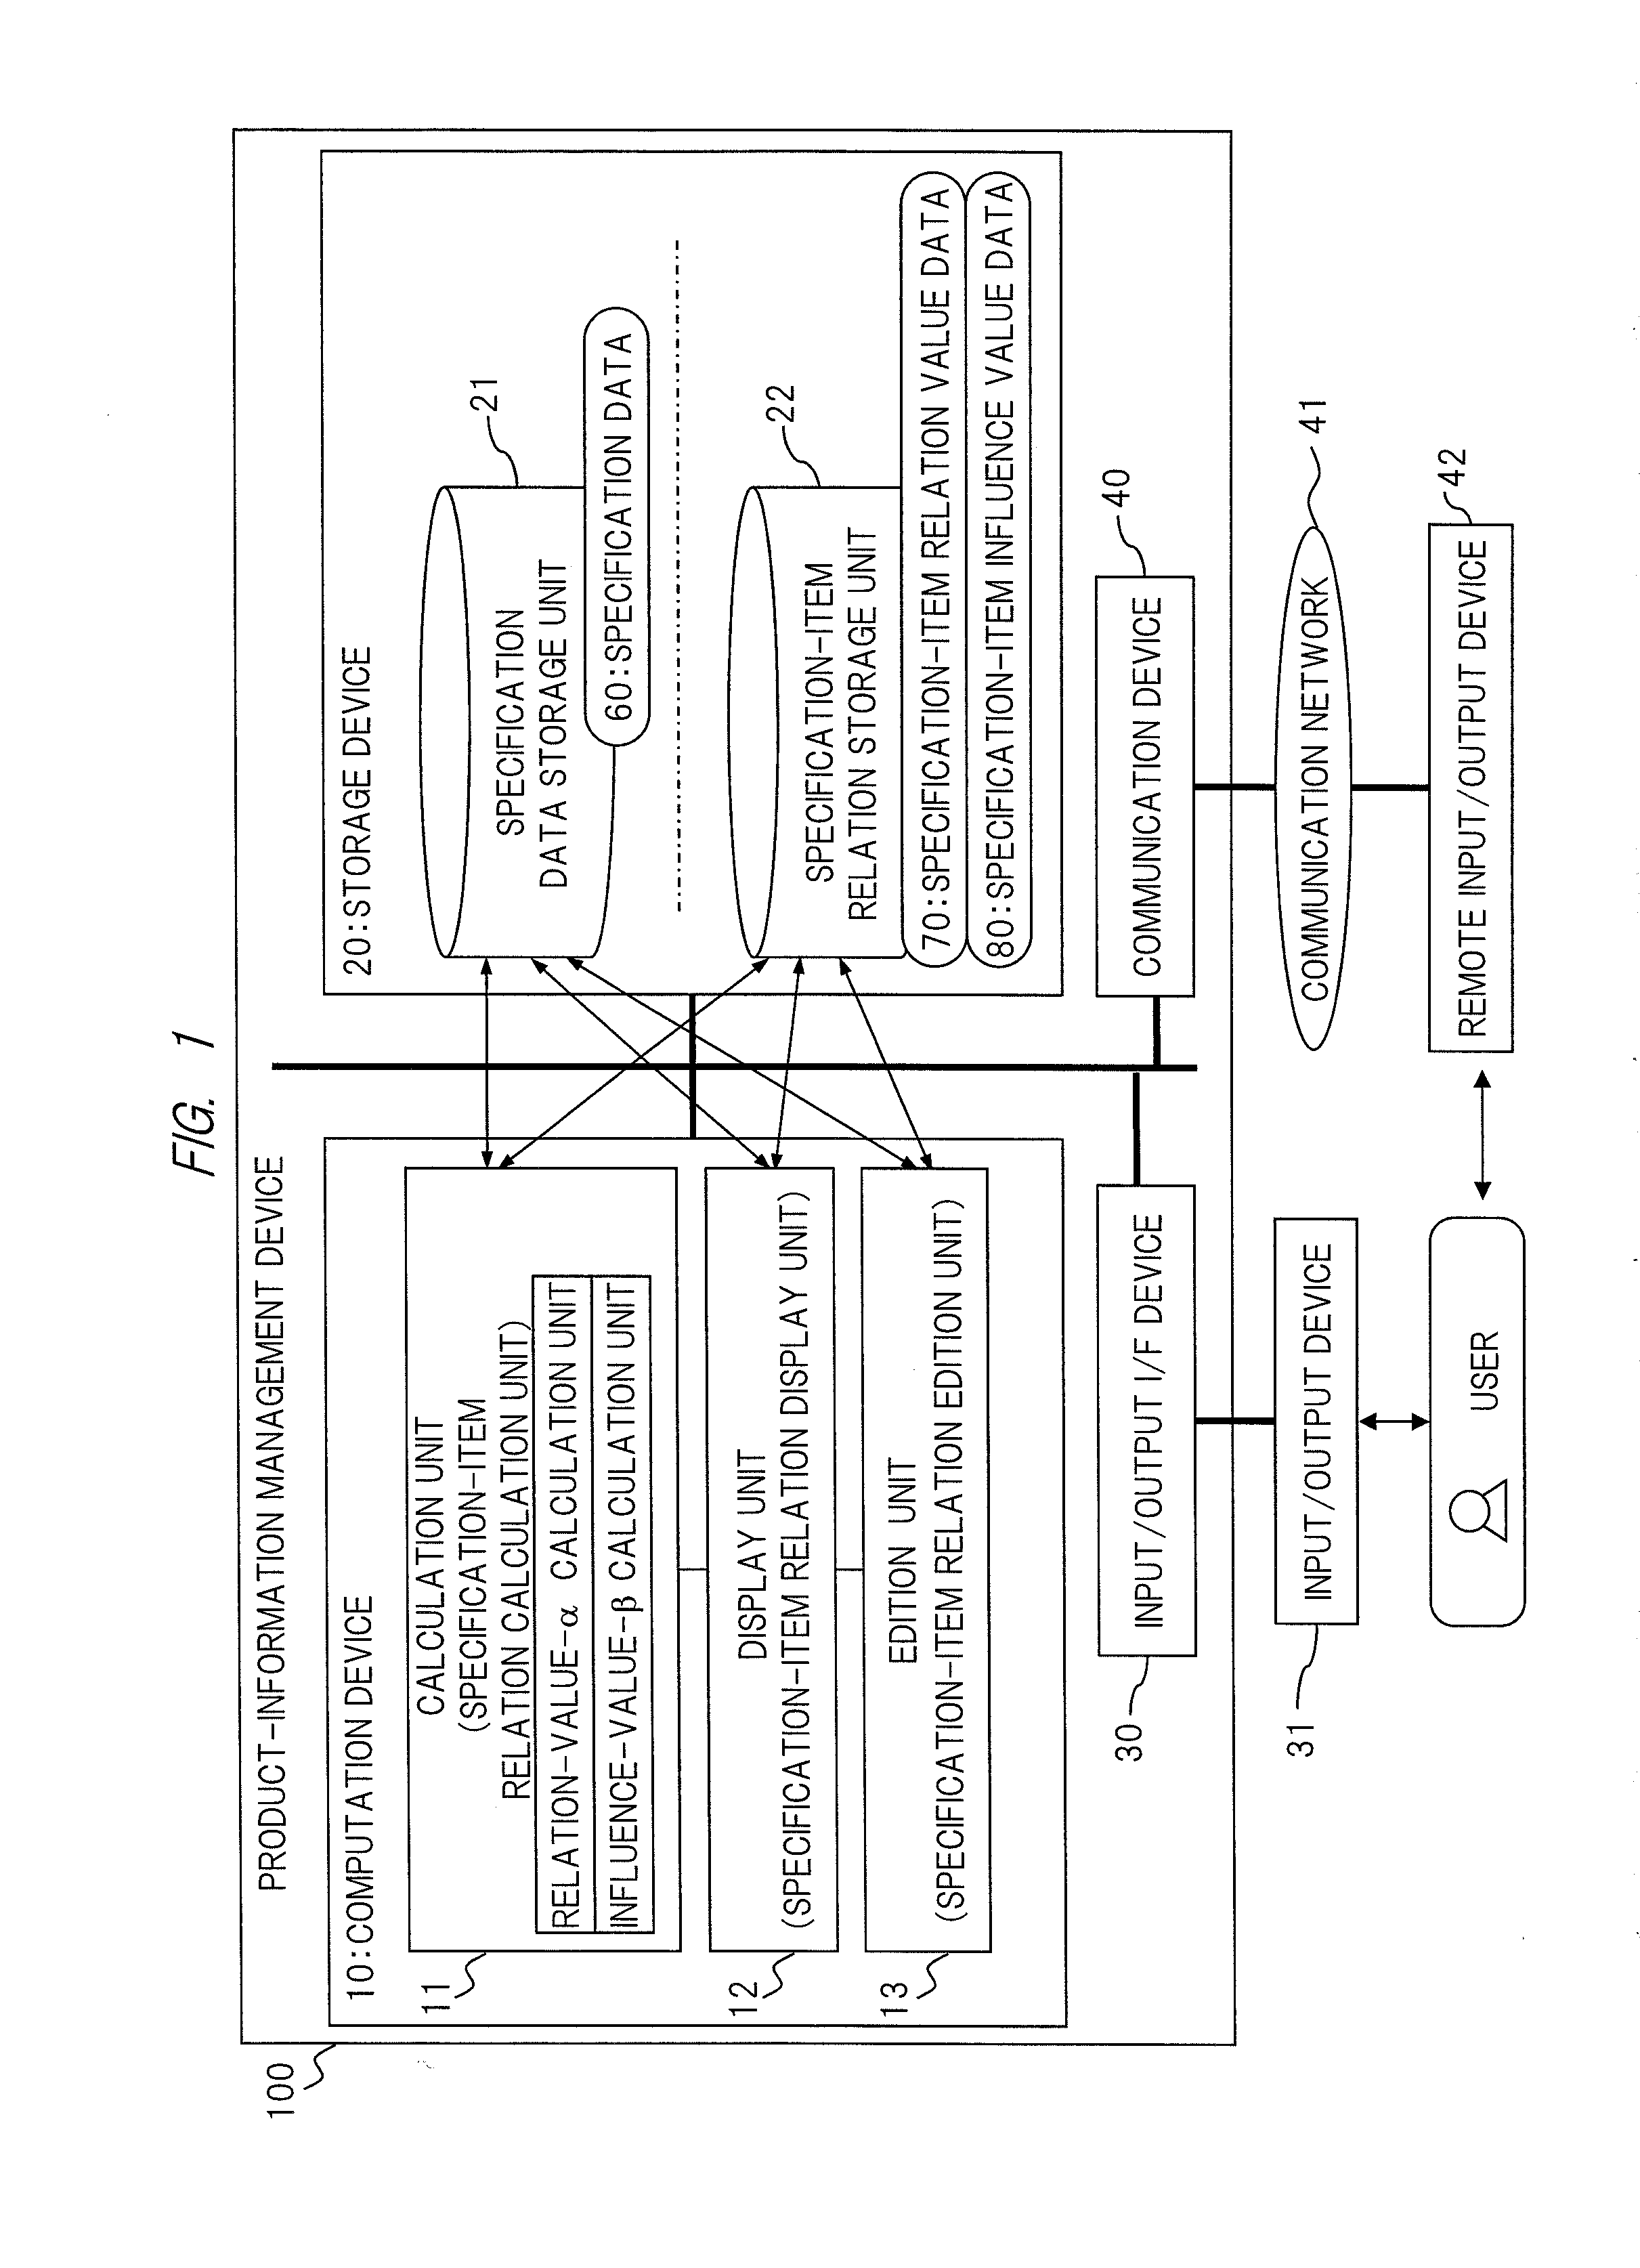 Product-information management device, method, and program